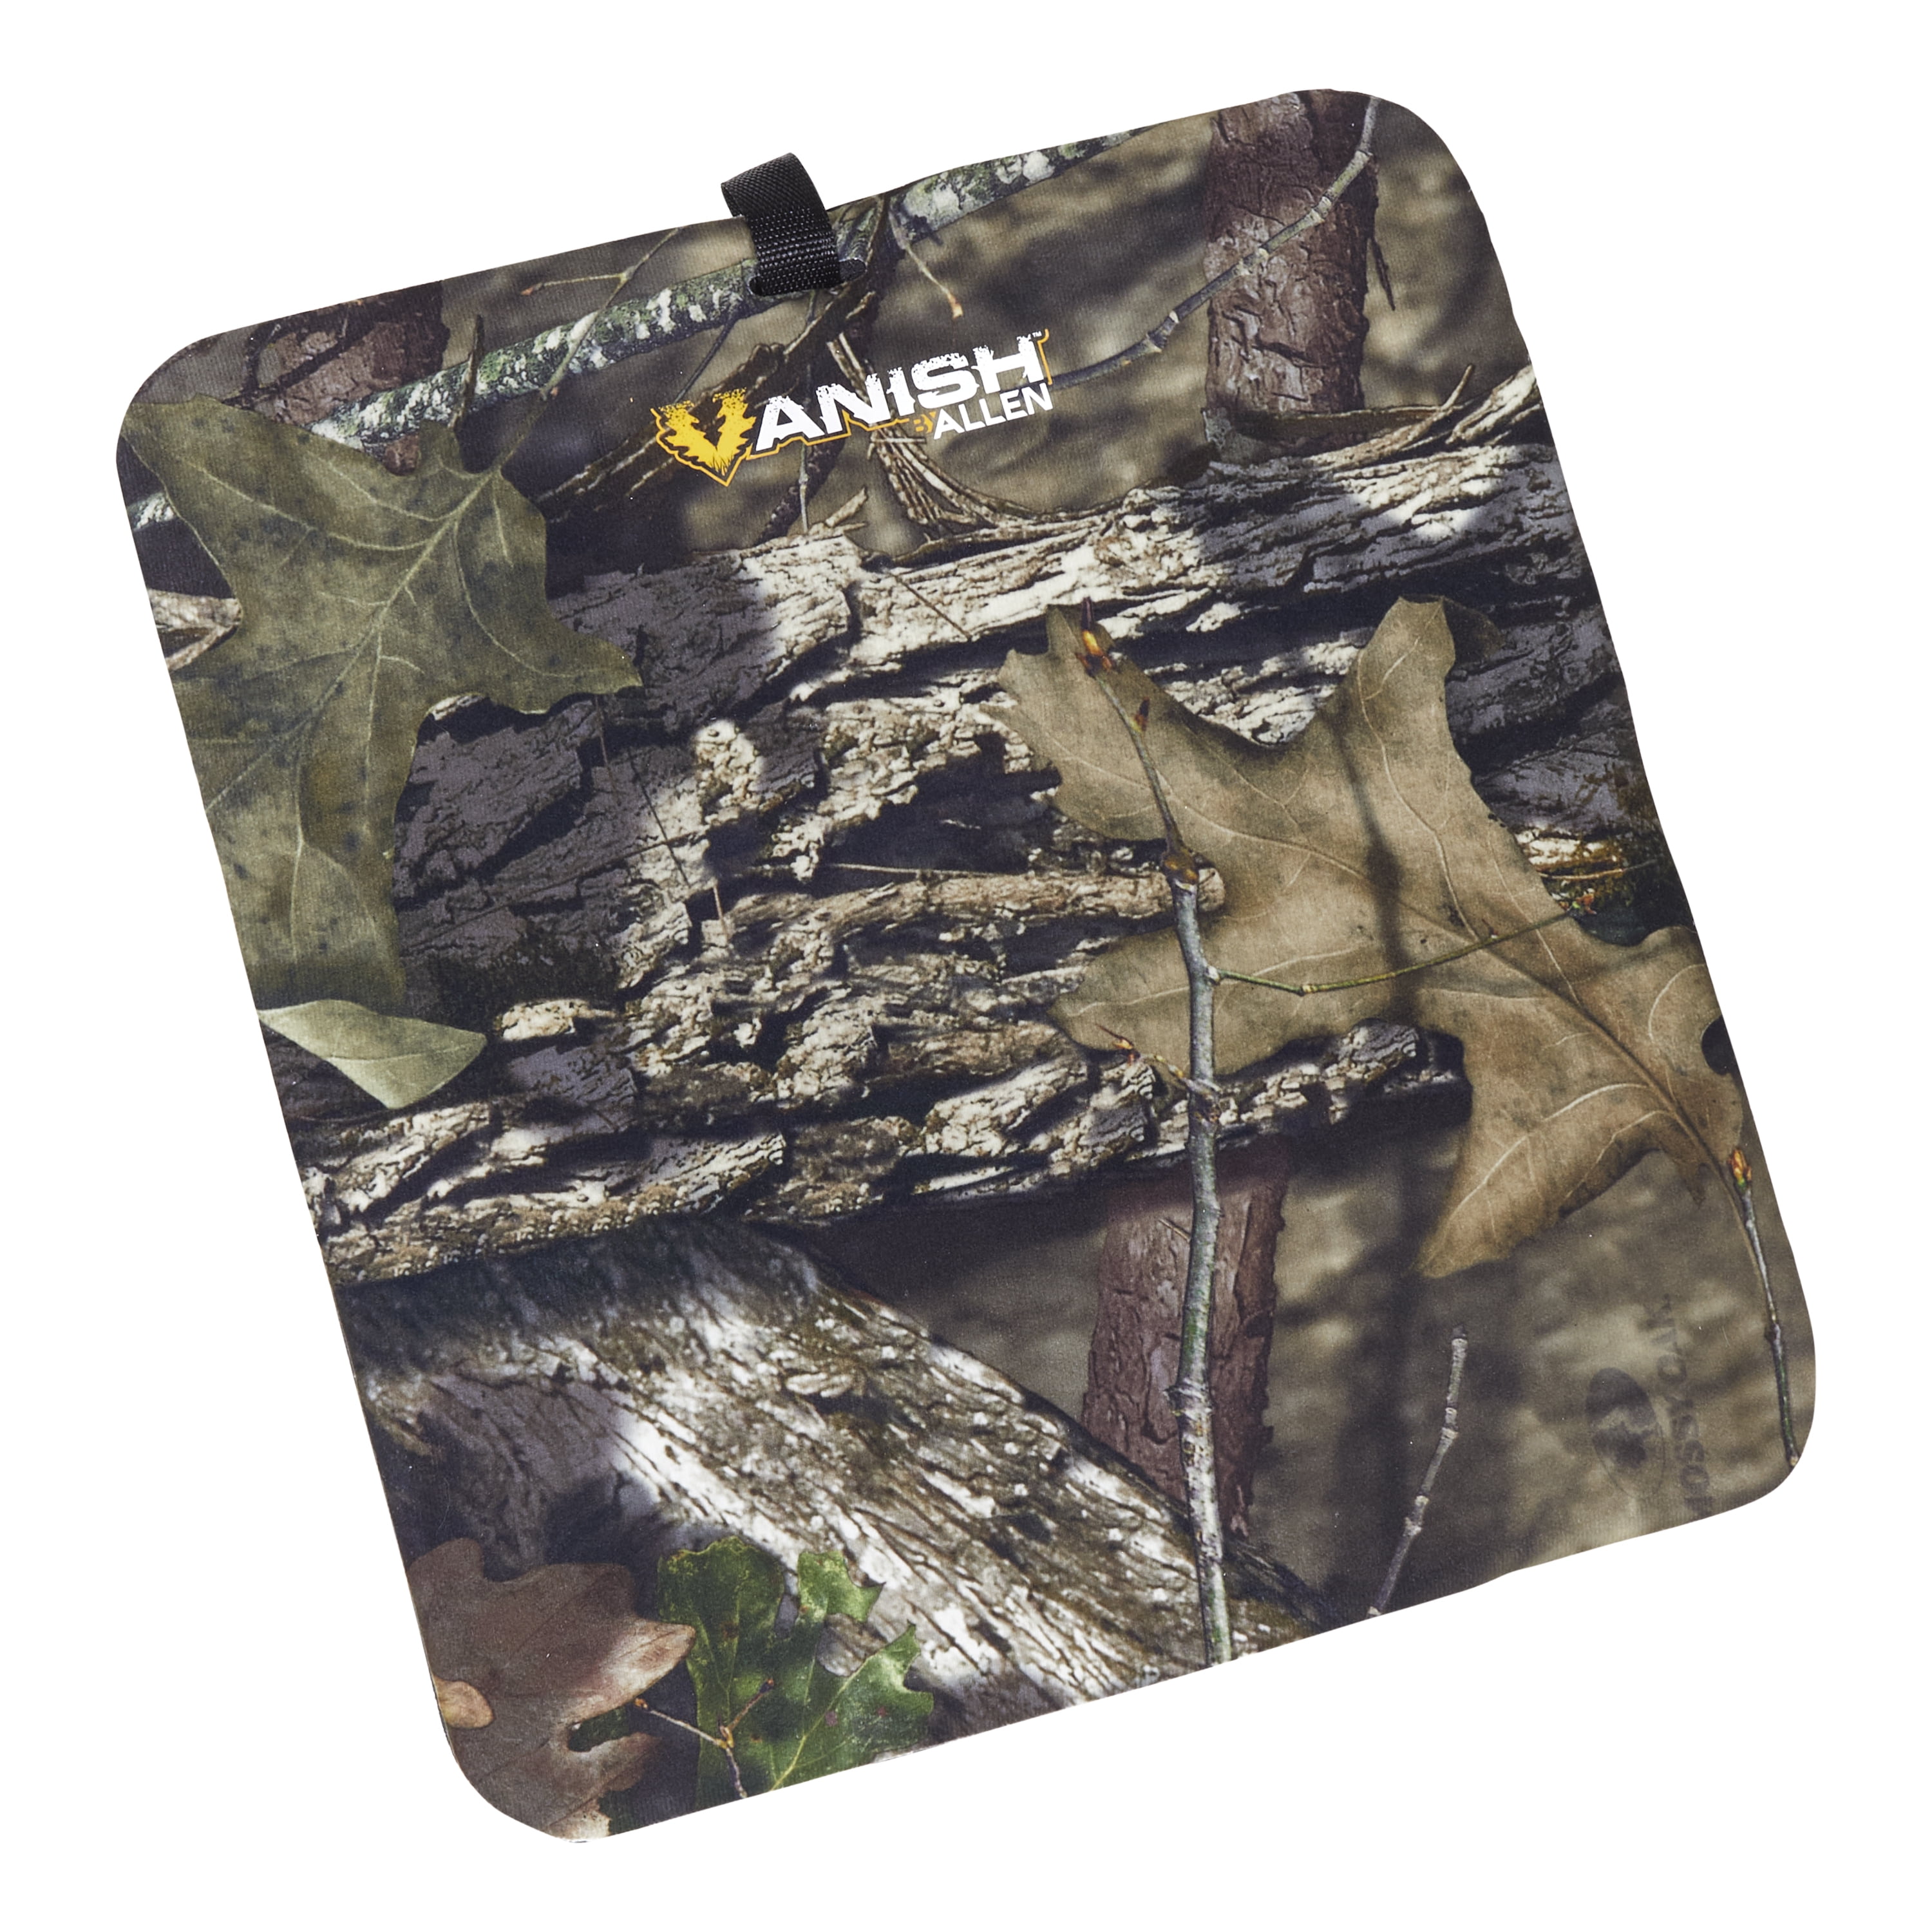 NEP THERM-A-SEAT® 1-1/2" THICK REALTREE XTRA CAMO HOT SEAT PAD 15015 